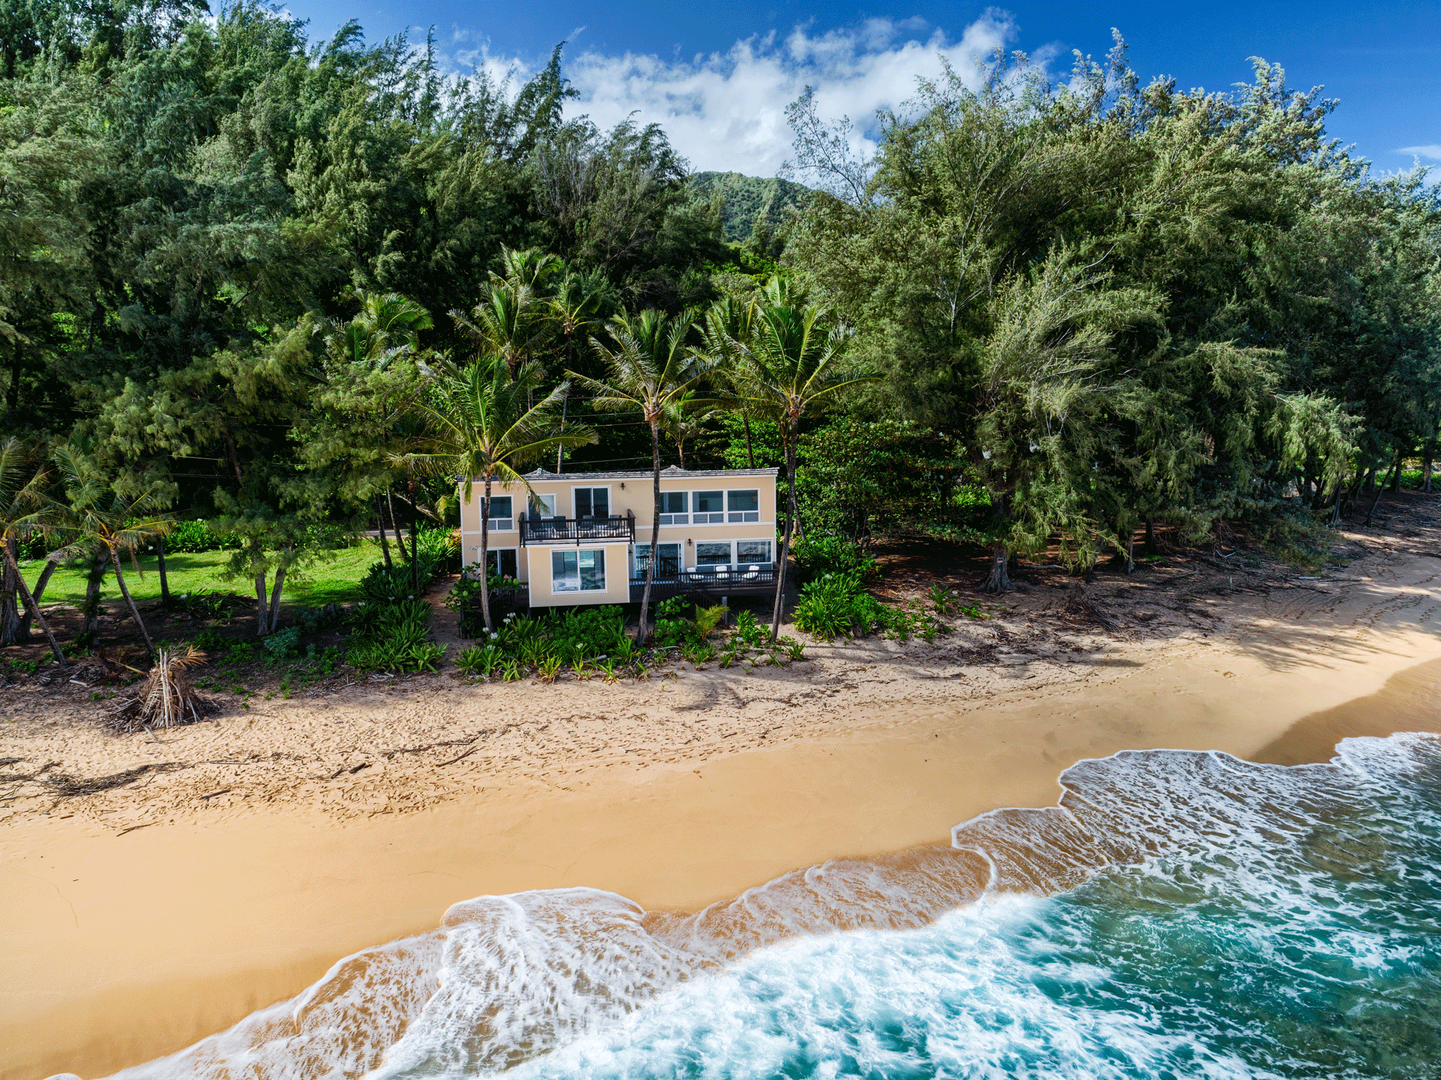 Hanalei Vacation Rentals, Haena Beach House TVNC#1258 - The golden-sand beach is all yours!